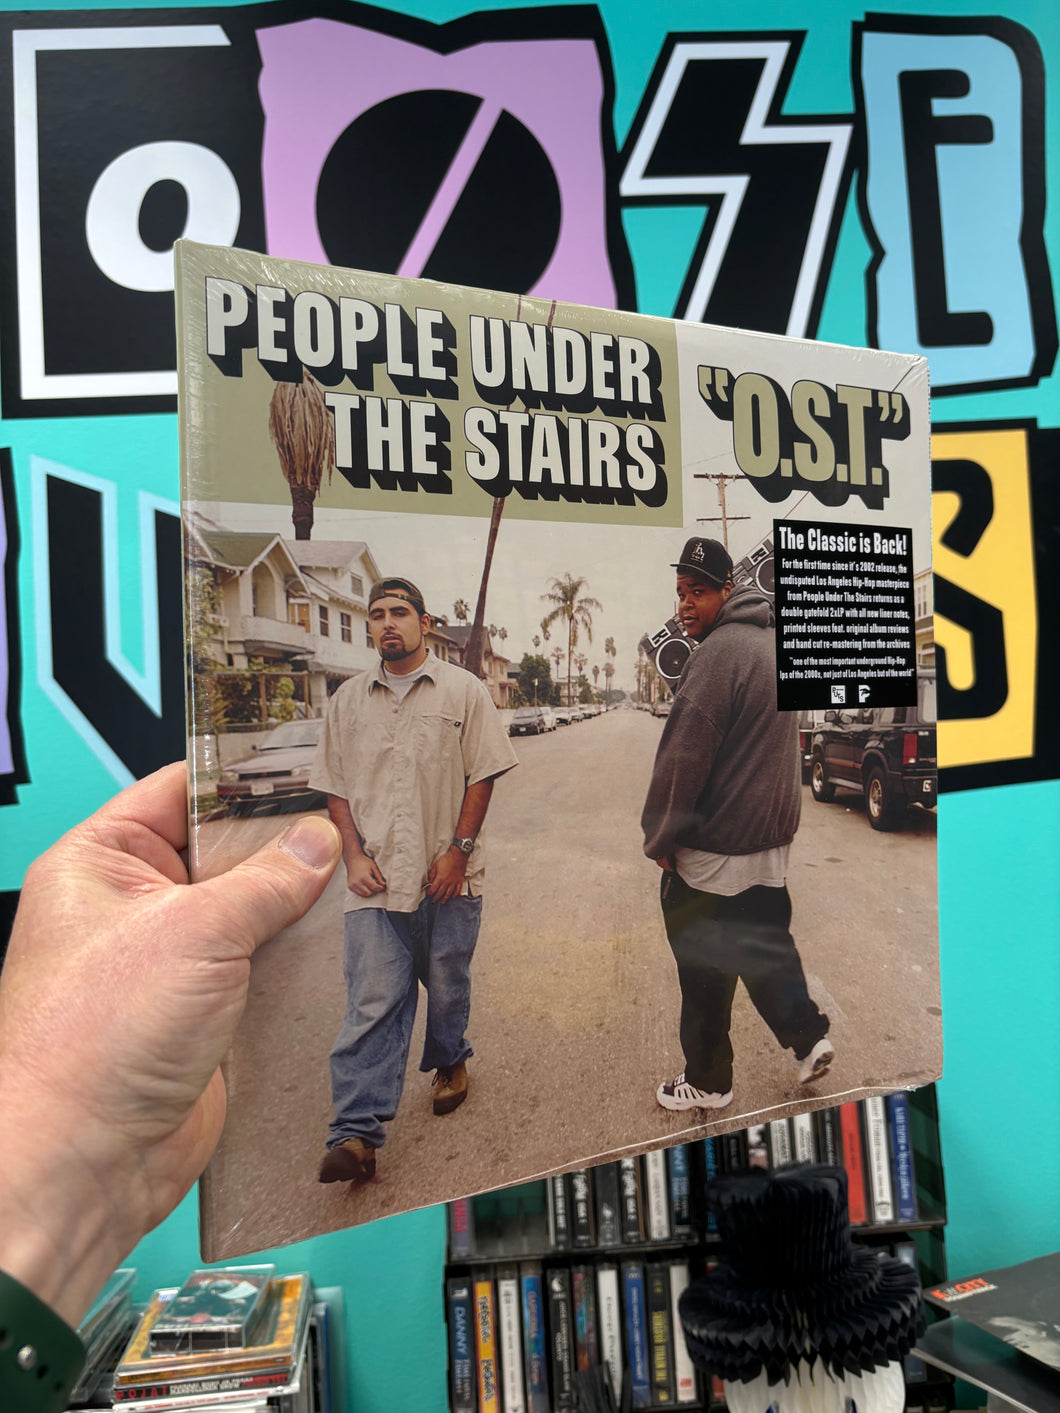 People Under The Stairs: ”O.S.T.”, 2LP, reissue, remastered, gatefold, Piecelock 70, US 2020